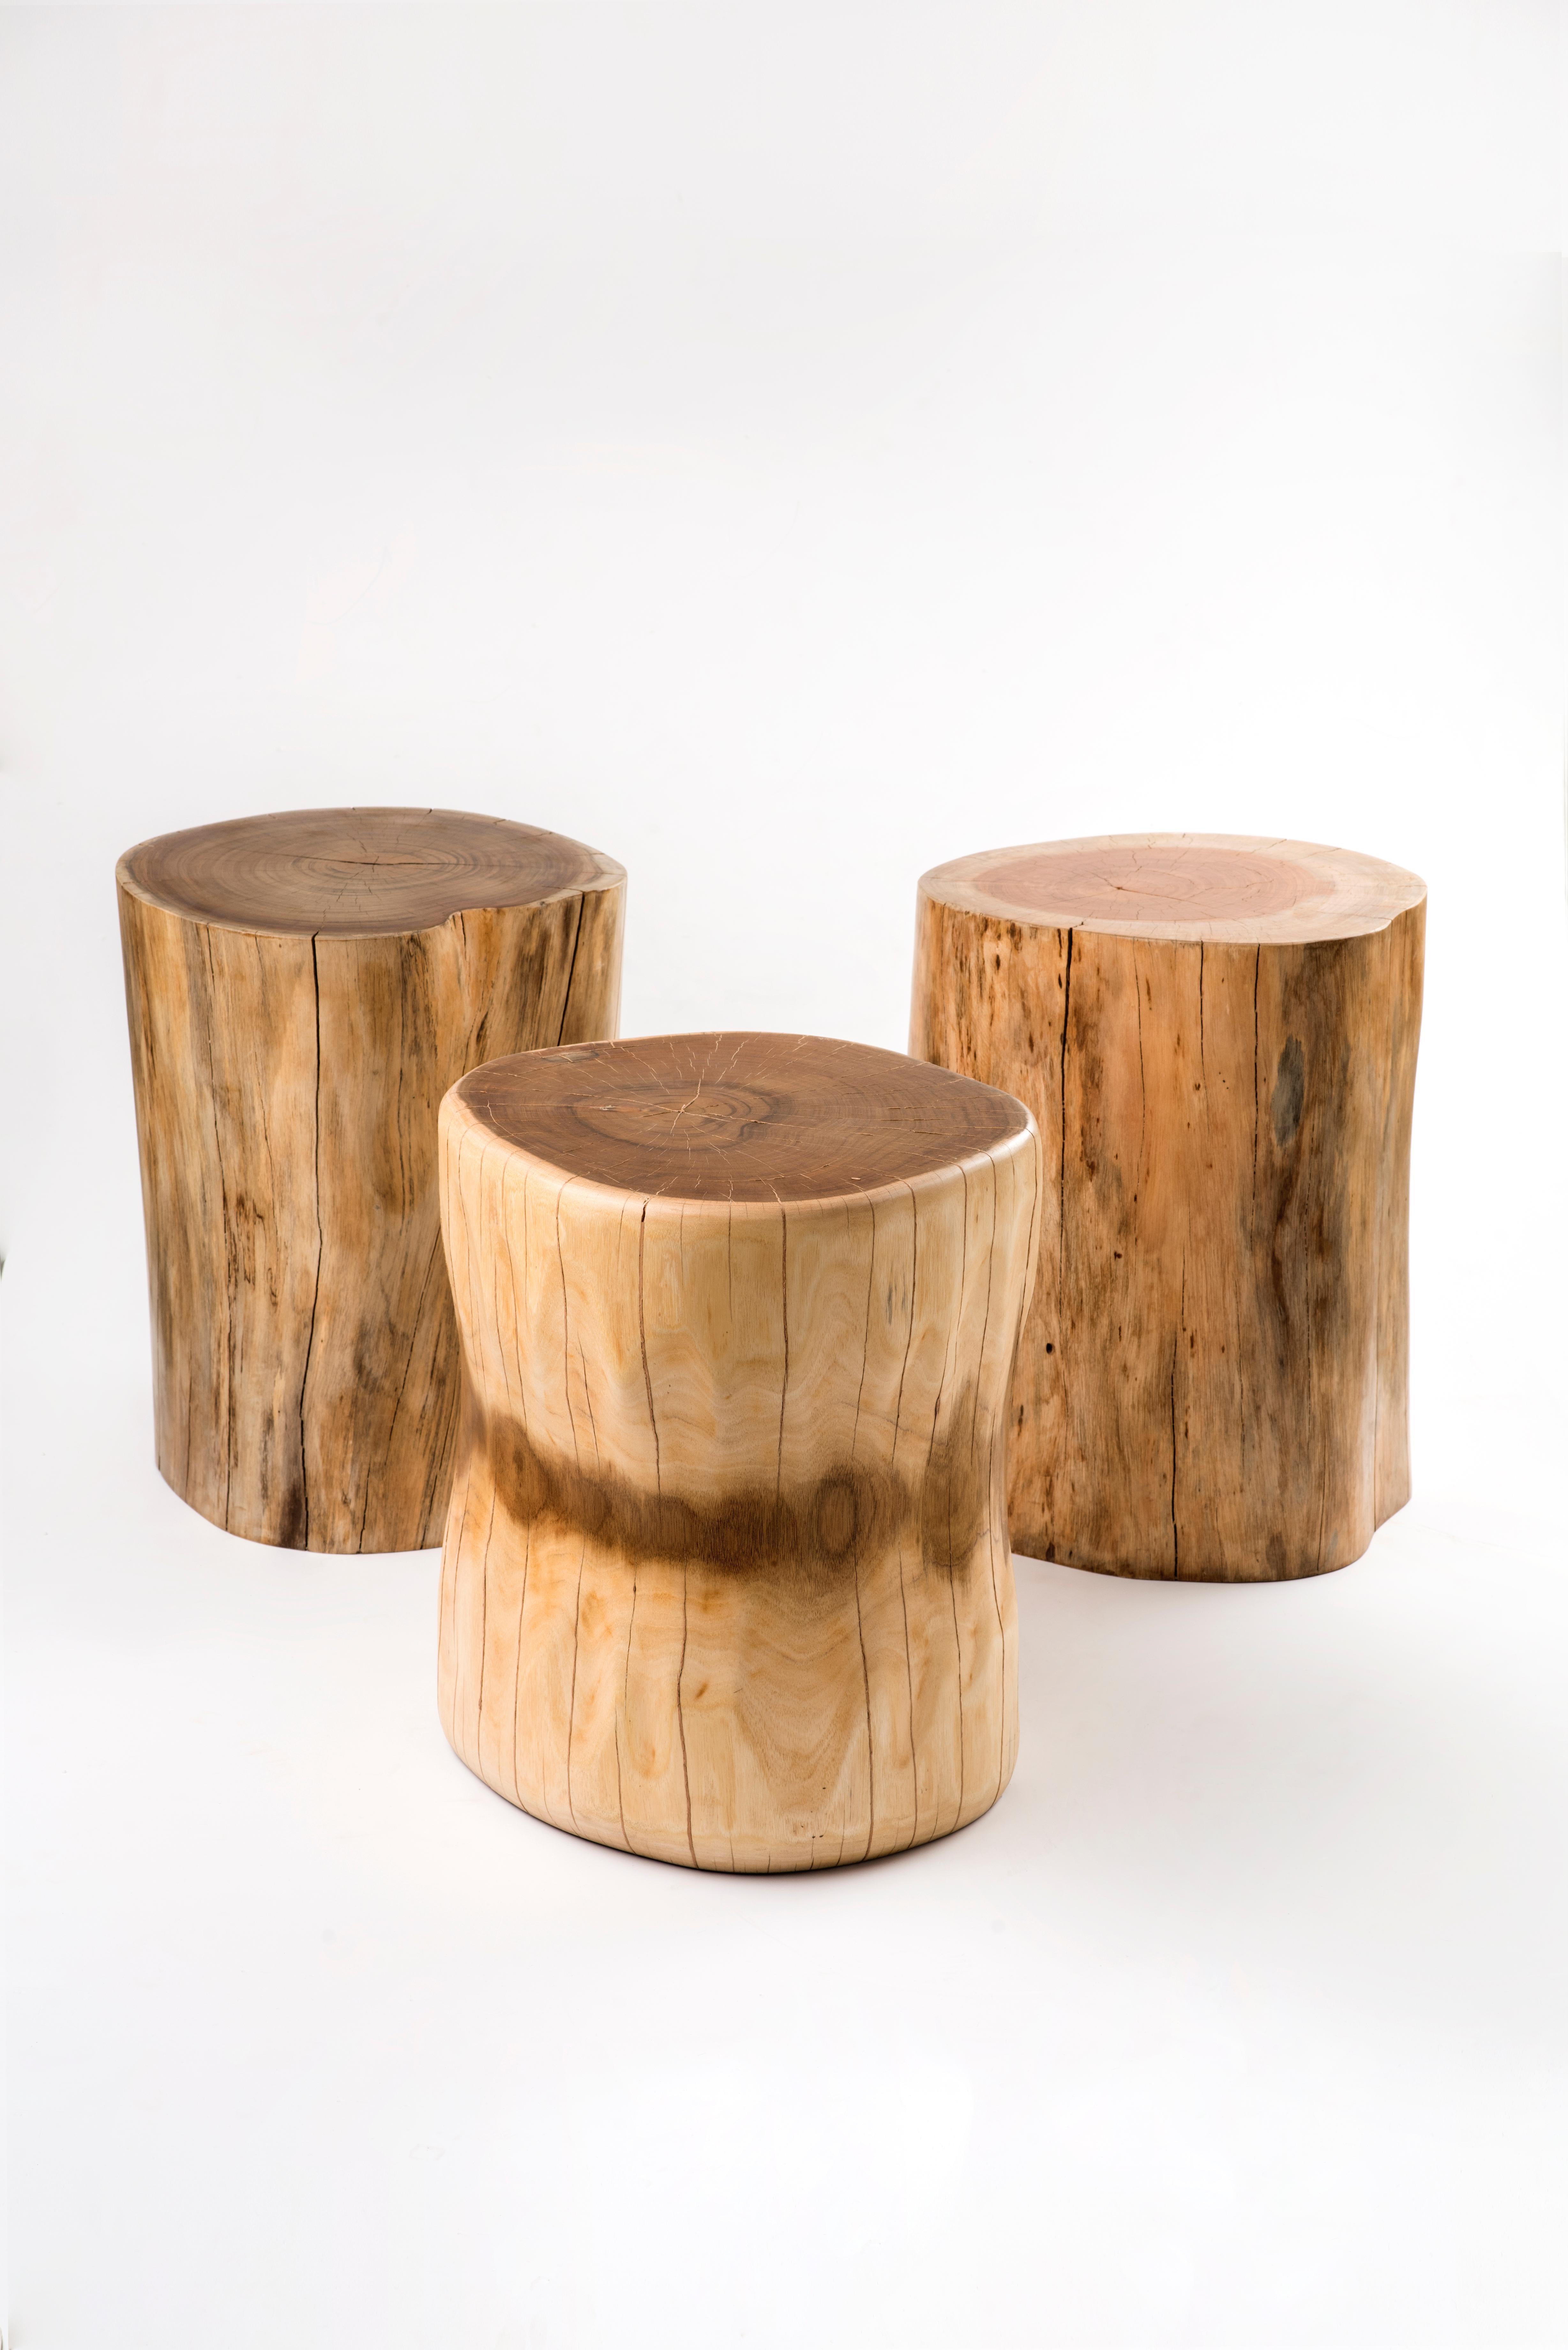 The Marrow Carved Solid Wooden Stump by Kunaal Kyhaan is cut from a solid trunk of Acacia and carved to reveal the layers of the wood.
Can be used as a stool or side table. 

Solid Wood. 